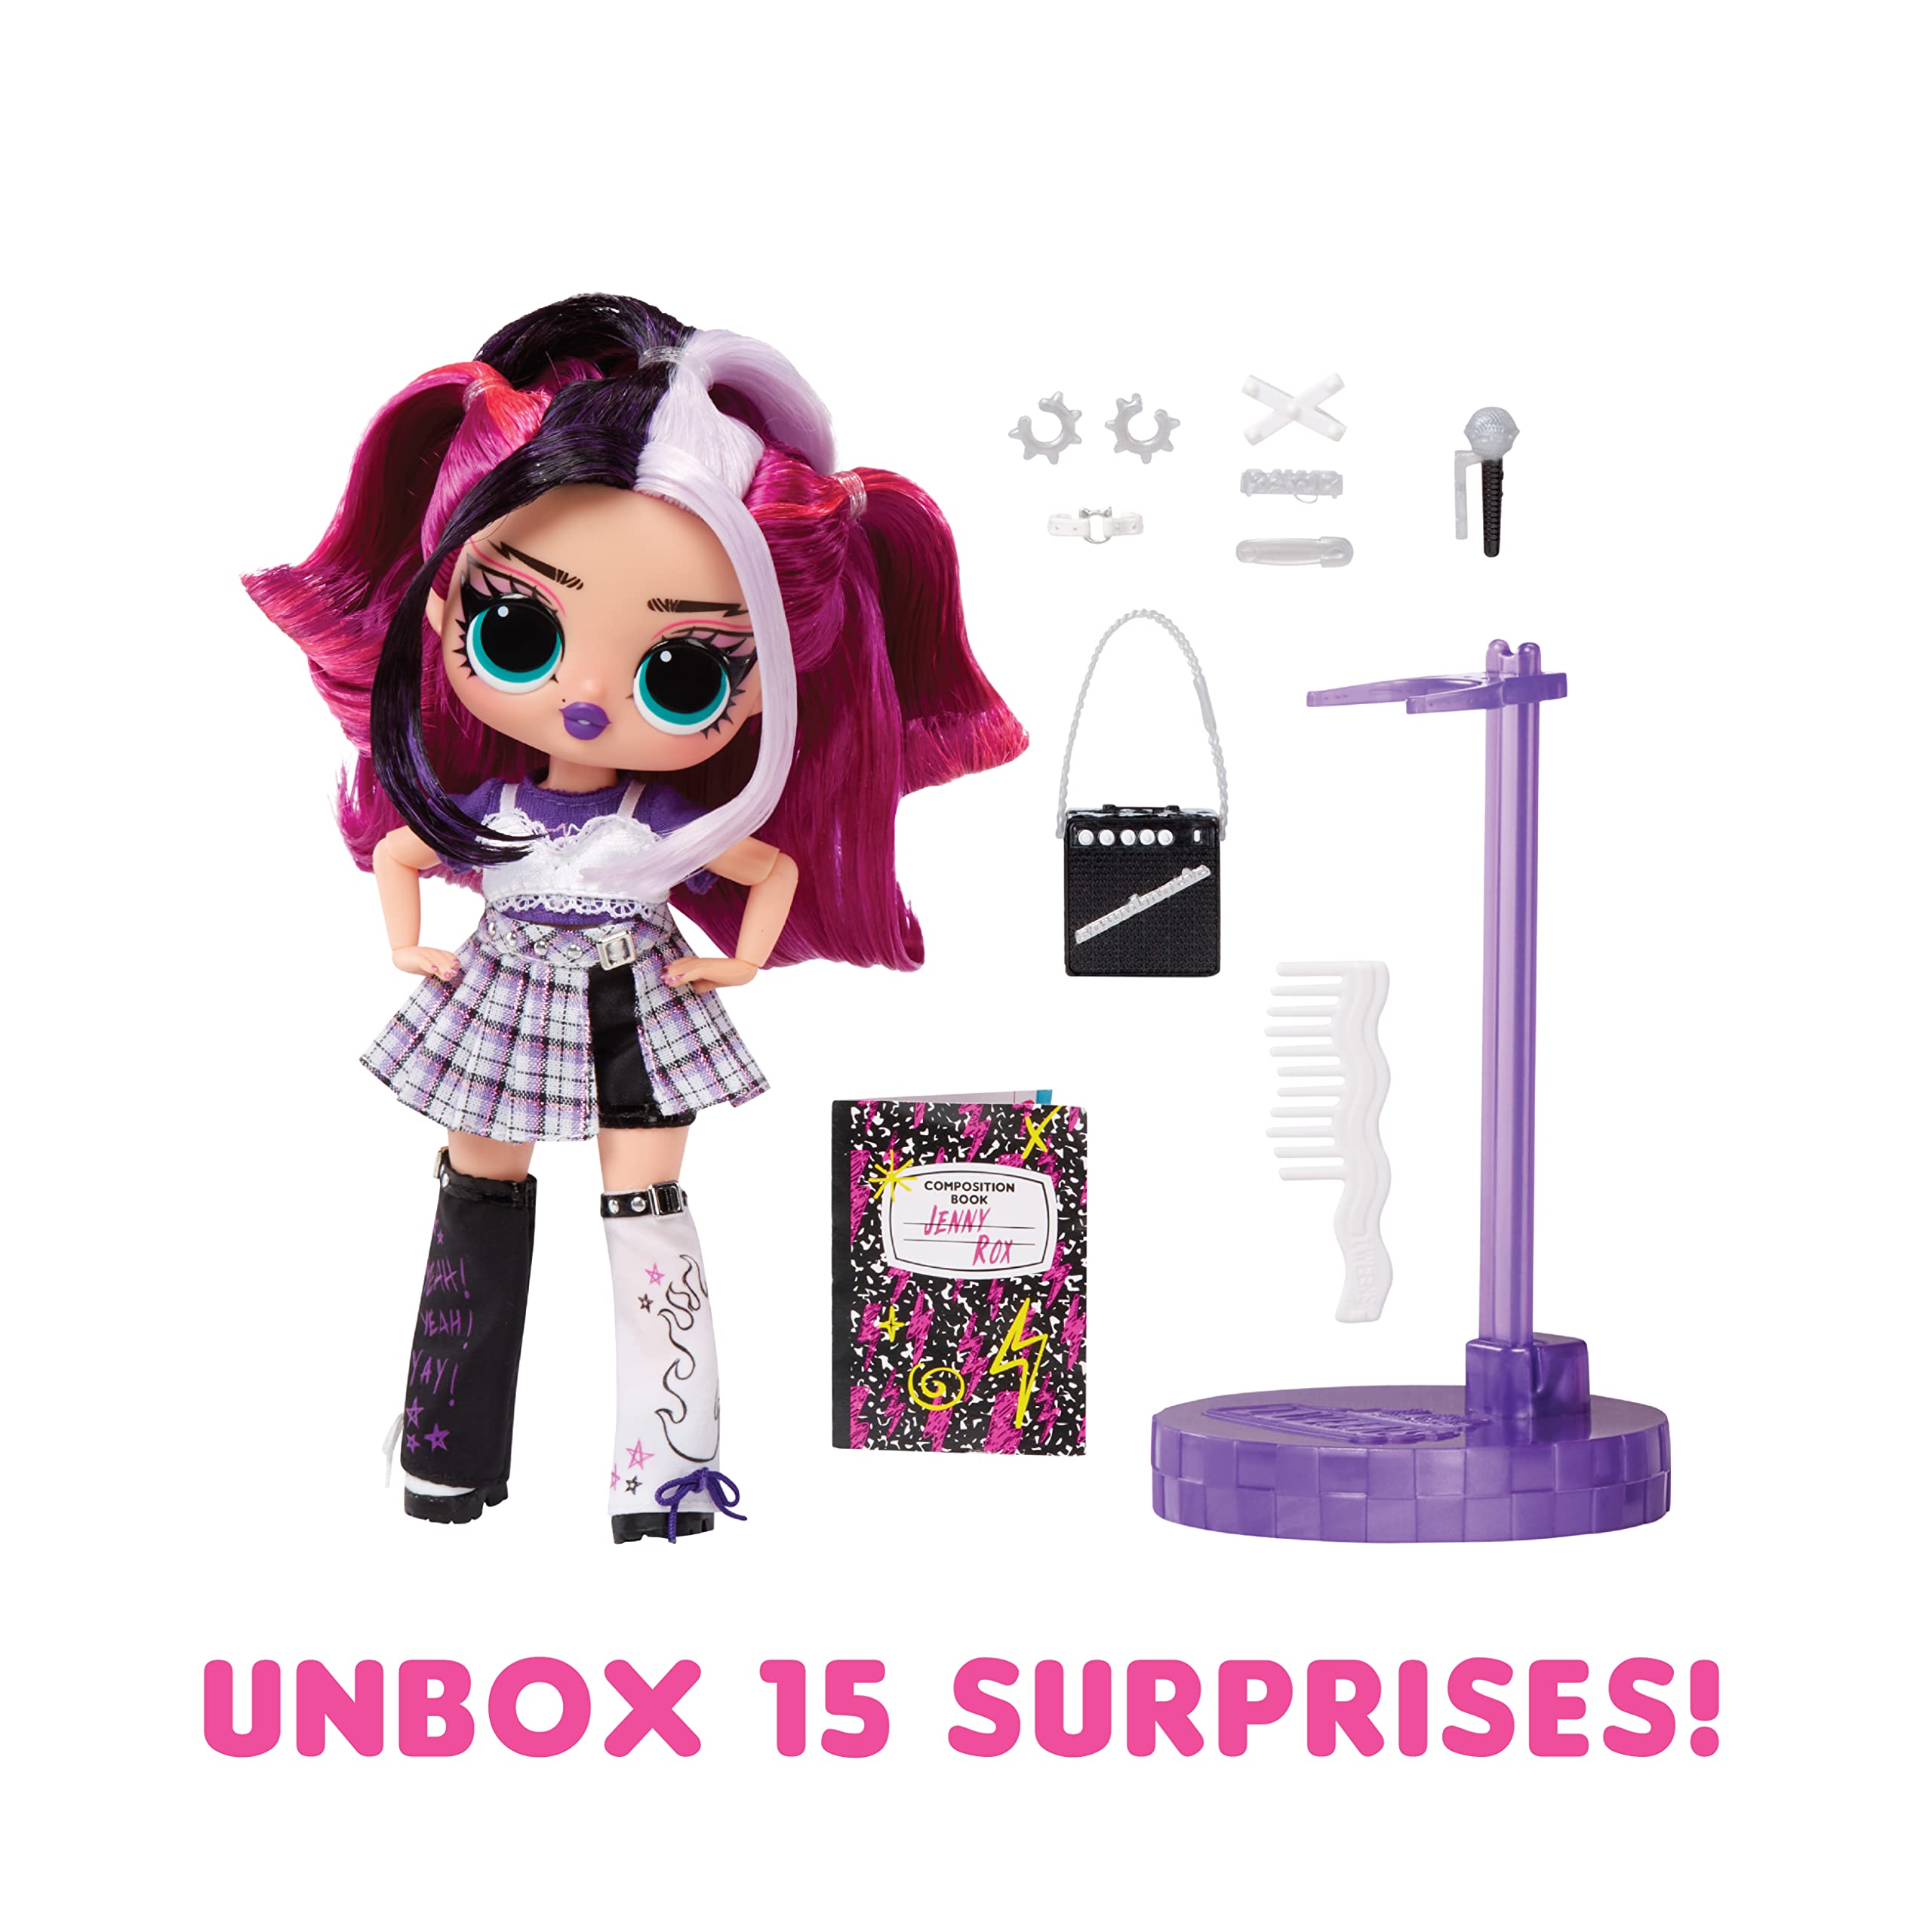 L.O.L. Surprise! Tweens Series 4 Fashion Doll Jenny Rox with 15 Surprises and Fabulous Accessories – Great Gift for Kids Ages 4+